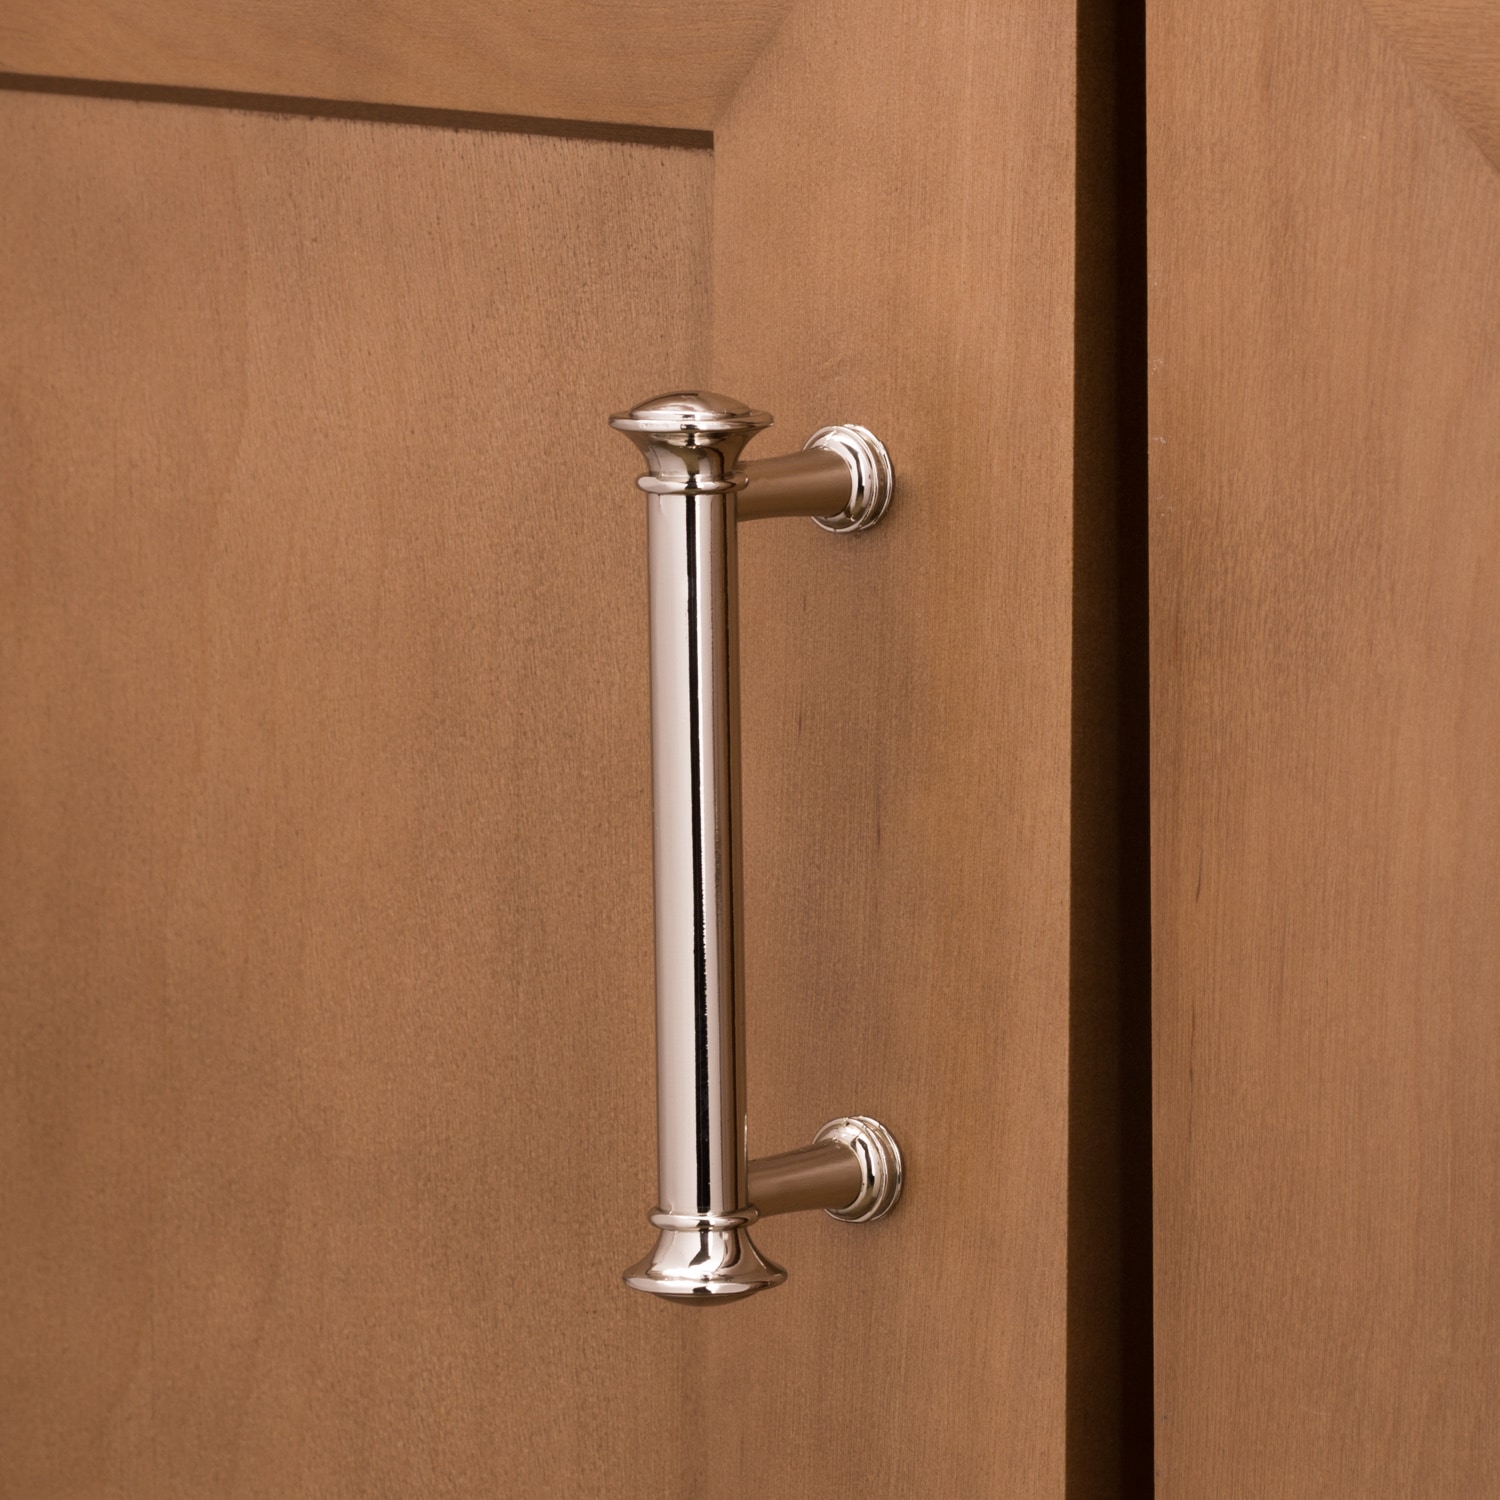 allen + roth Center to Center Polished Nickel Drawer Pulls in the